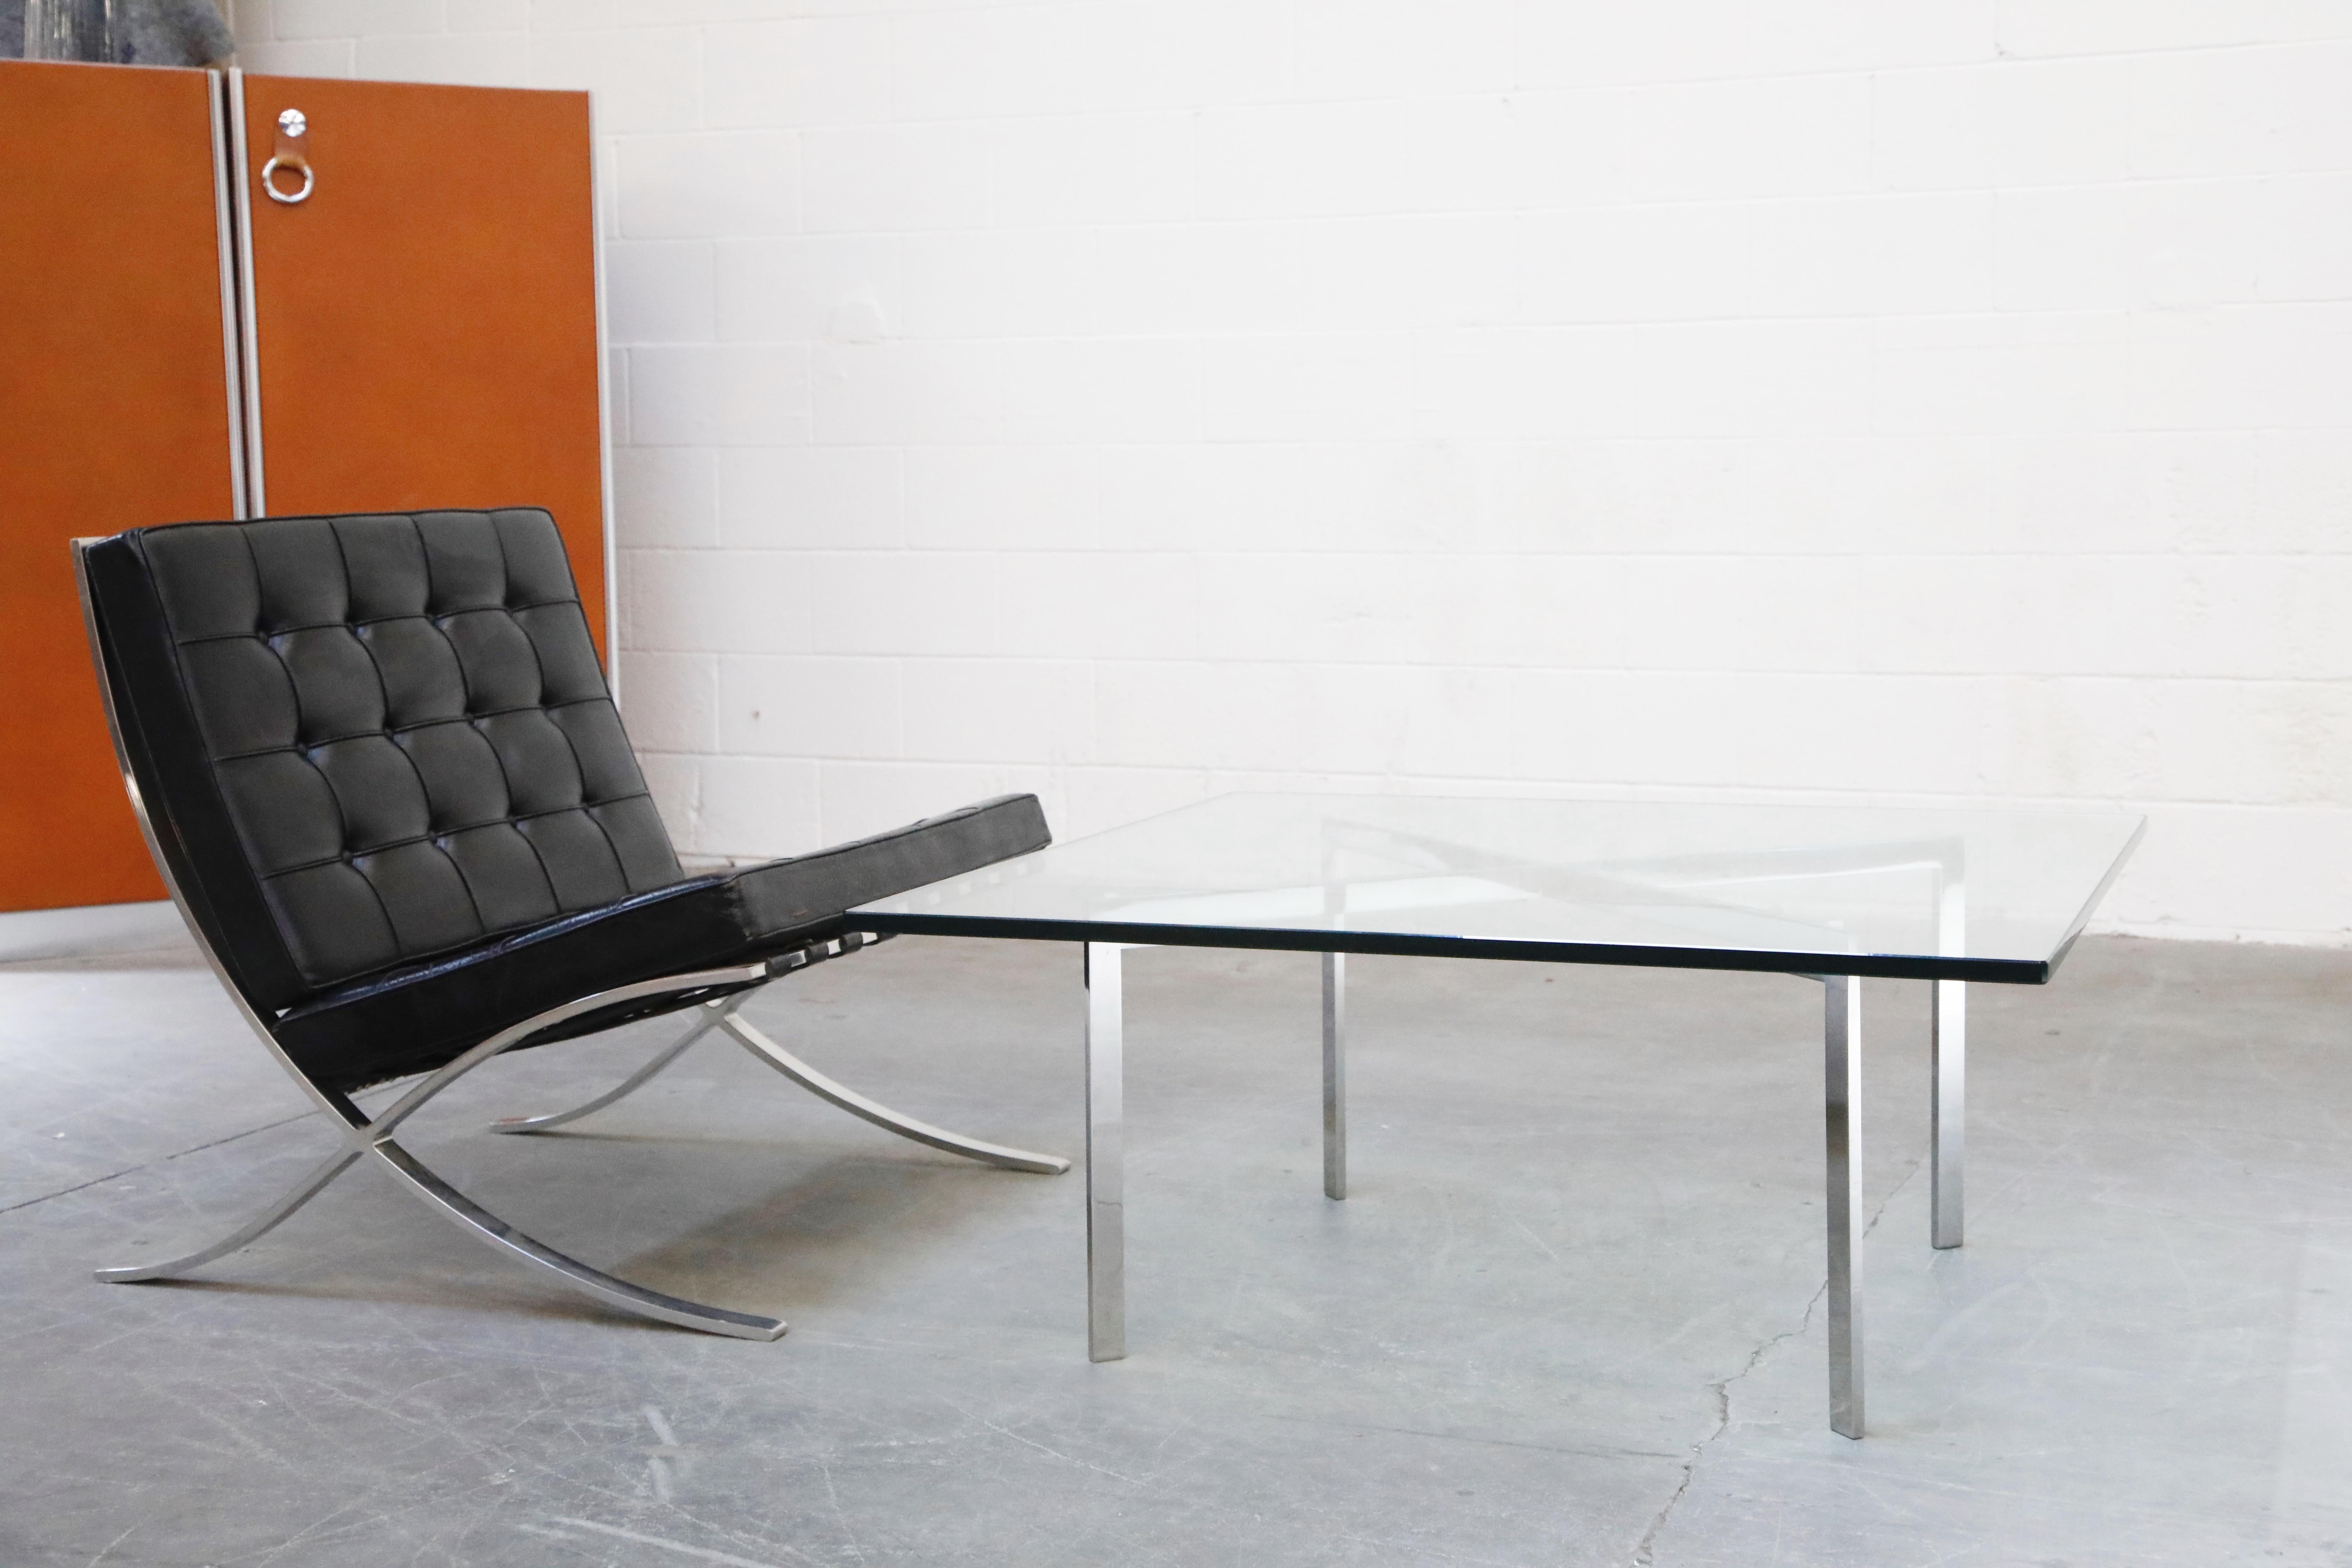 American Barcelona Coffee Table by Mies van der Rohe for Knoll International, Signed